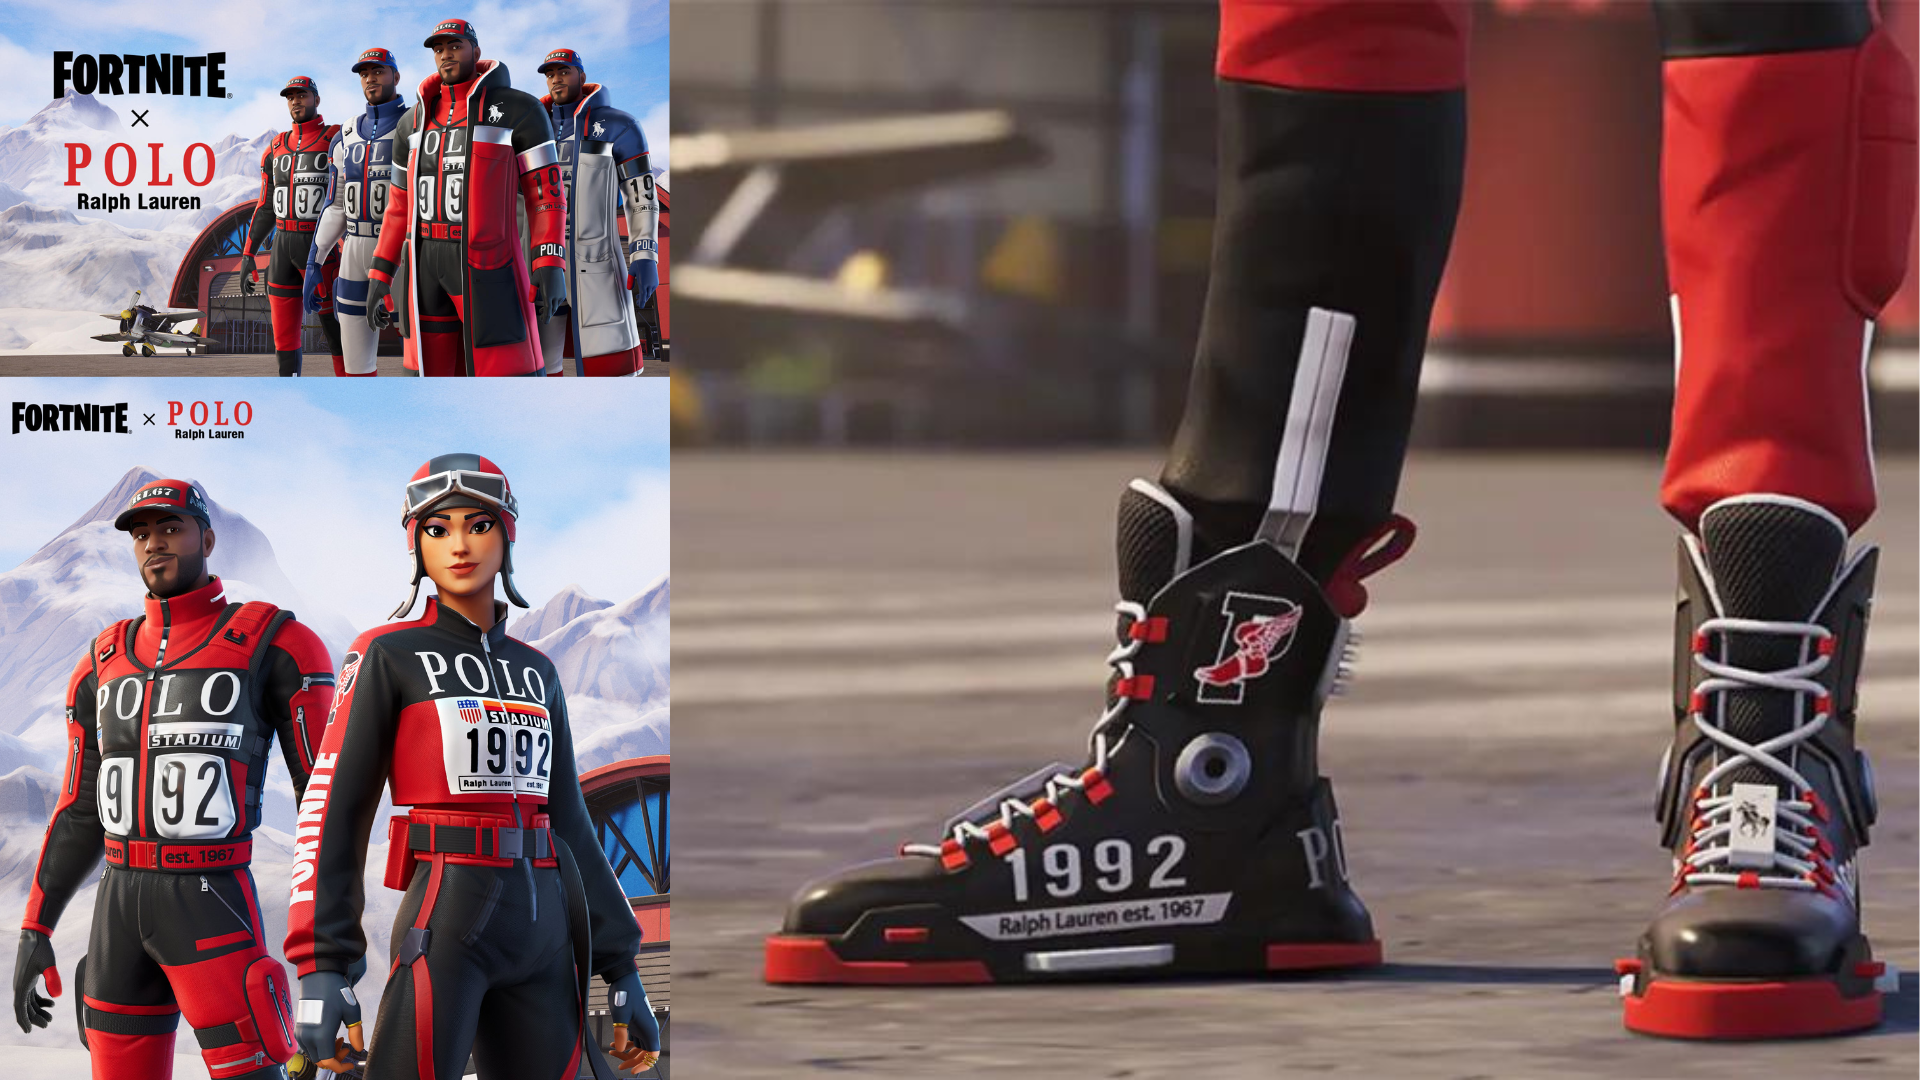 Fortnite x Polo ralph Lauren collaboration images featuring phygital boots close-up